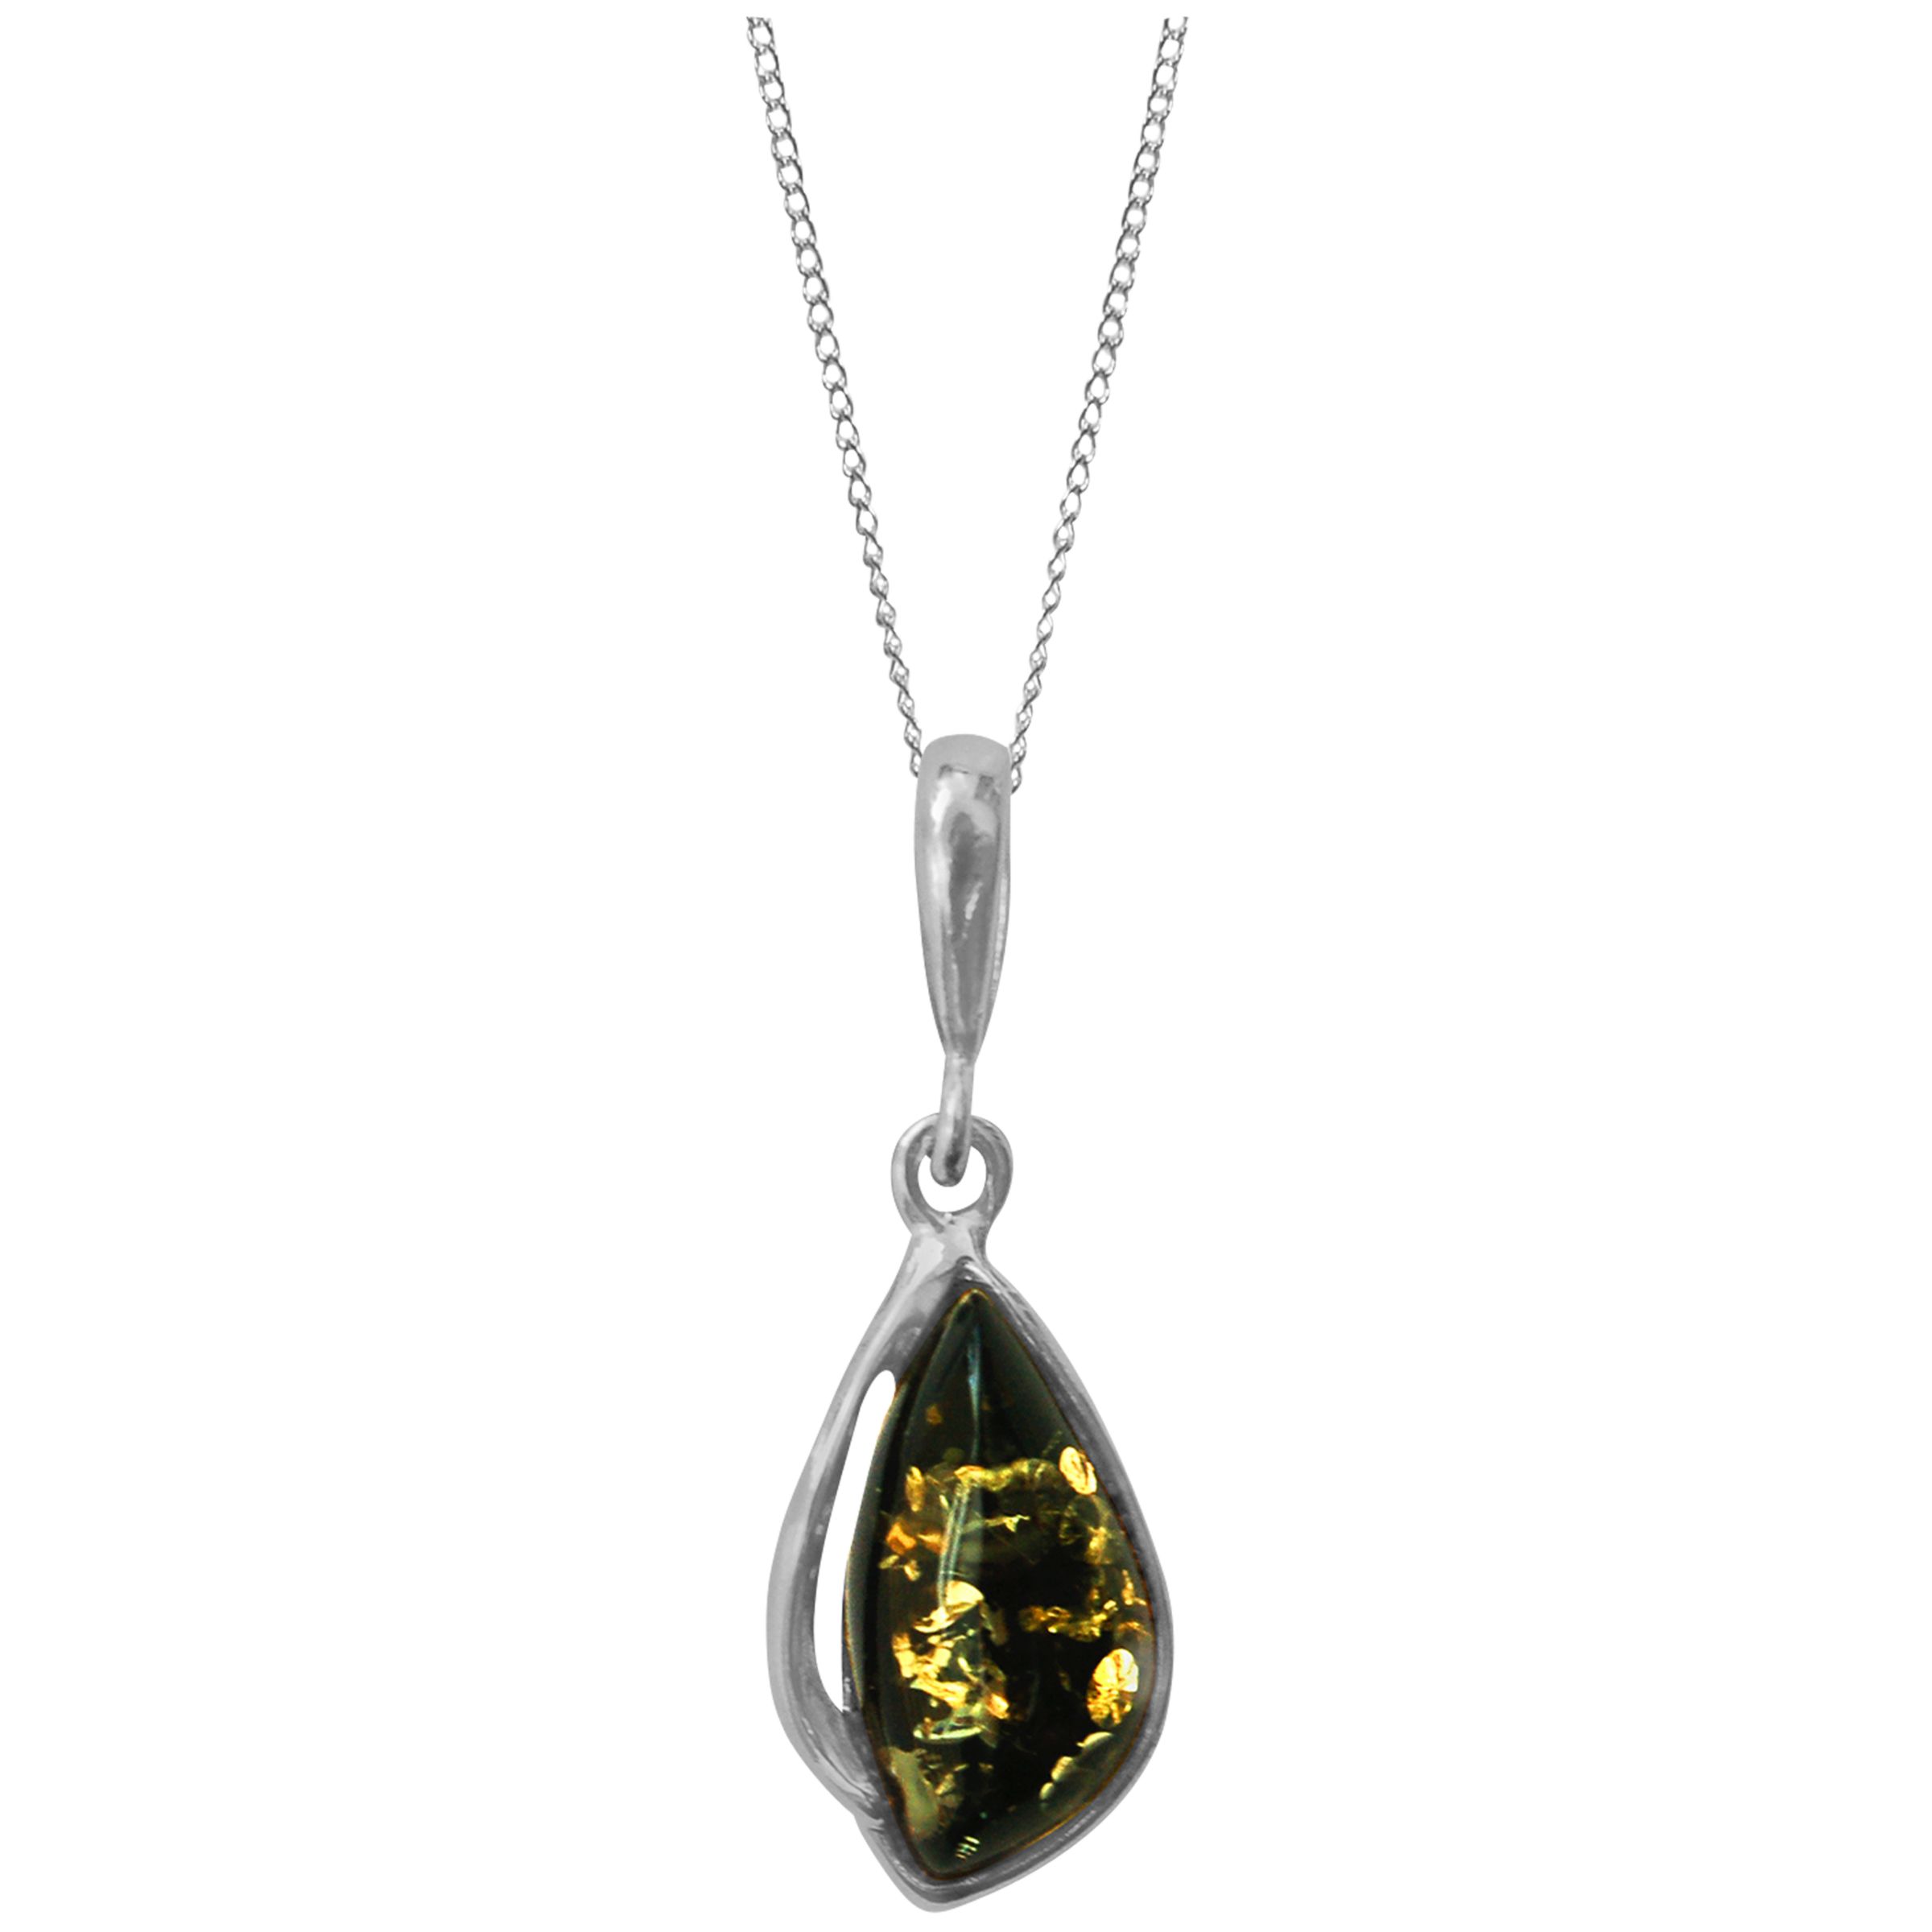 Goldmajor Green Amber and Sterling Silver Drop Pendant Necklace, Silver/Green